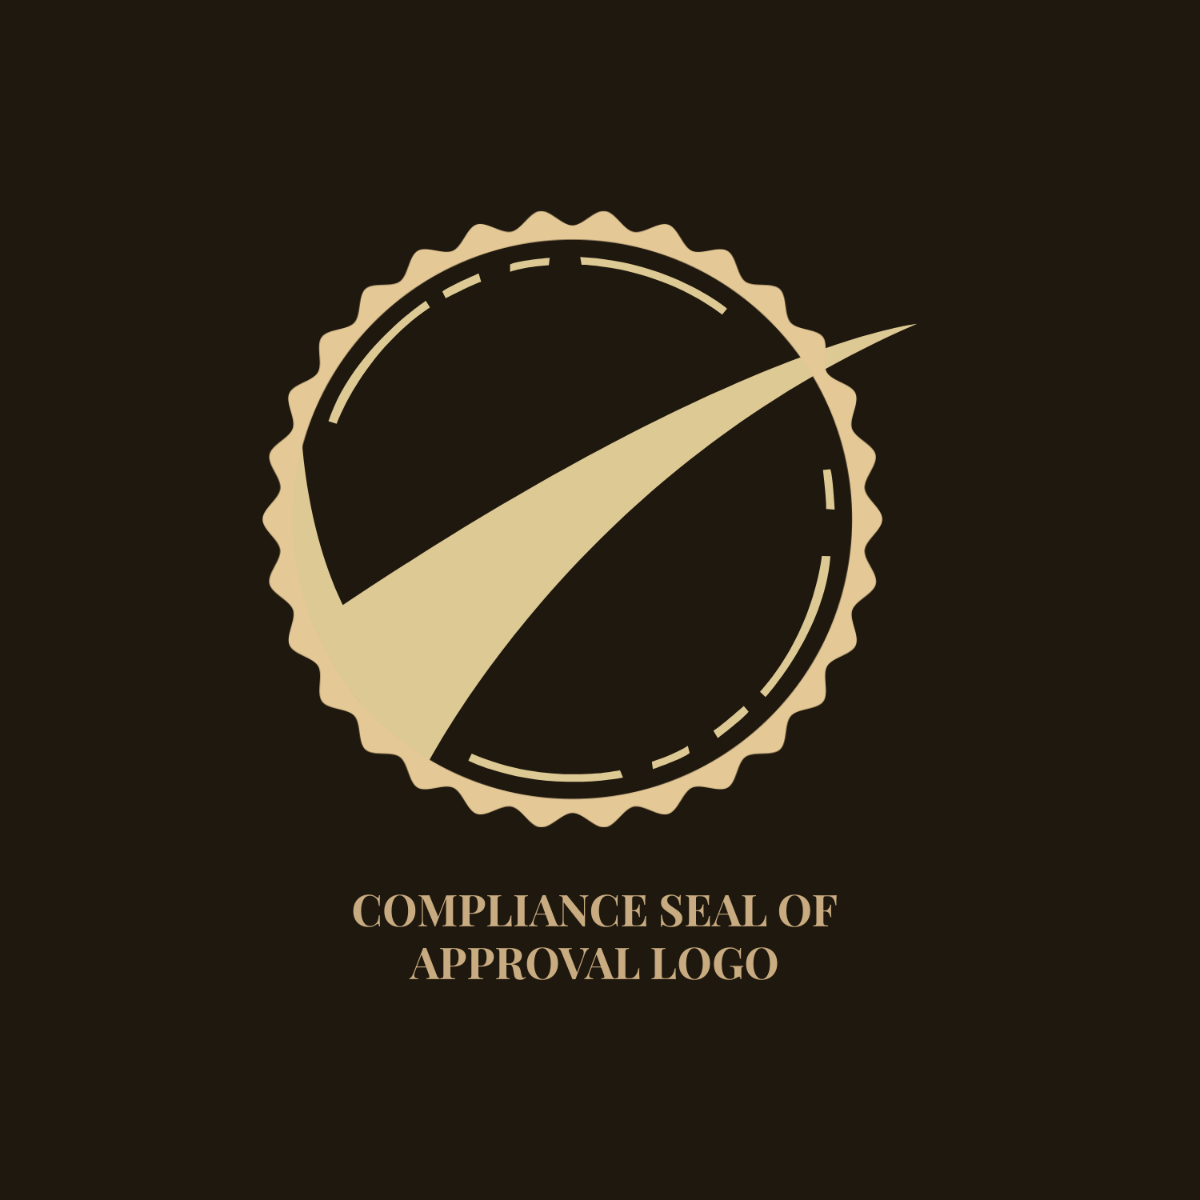 Compliance Seal of Approval Logo Template